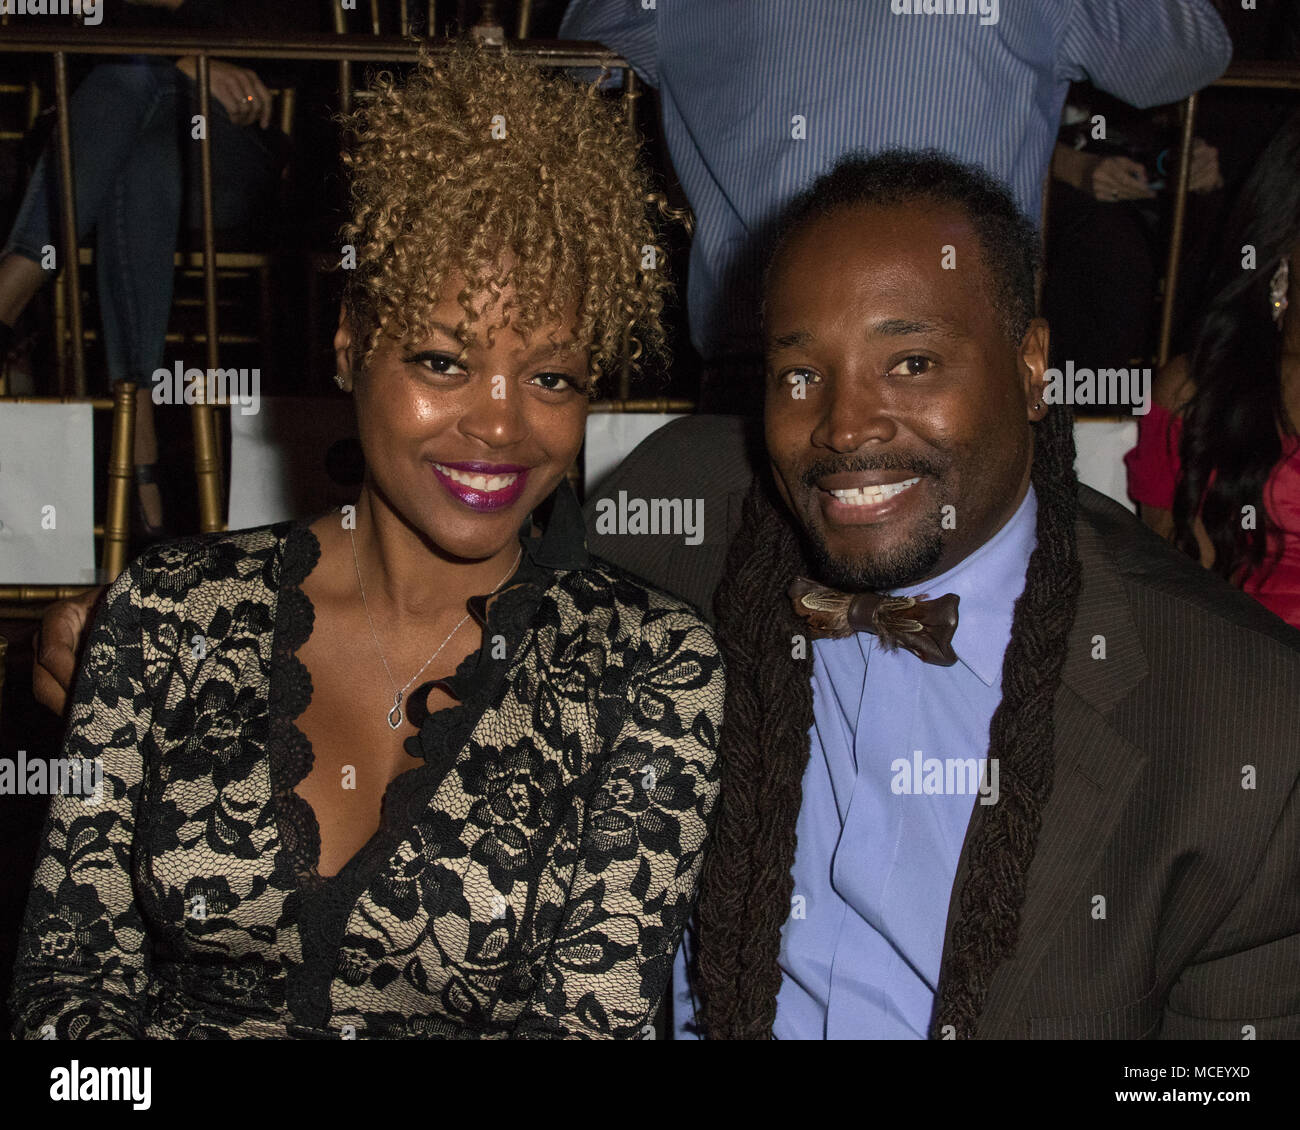 Art Hearts Fashion Los Angeles Fashion Week - Celebrity Sightings at The MacArthur - Day 4  Featuring: Nyki Allen, Spencer Allen Where: Los Angeles, California, United States When: 16 Mar 2018 Credit: Sheri Determan/WENN.com Stock Photo